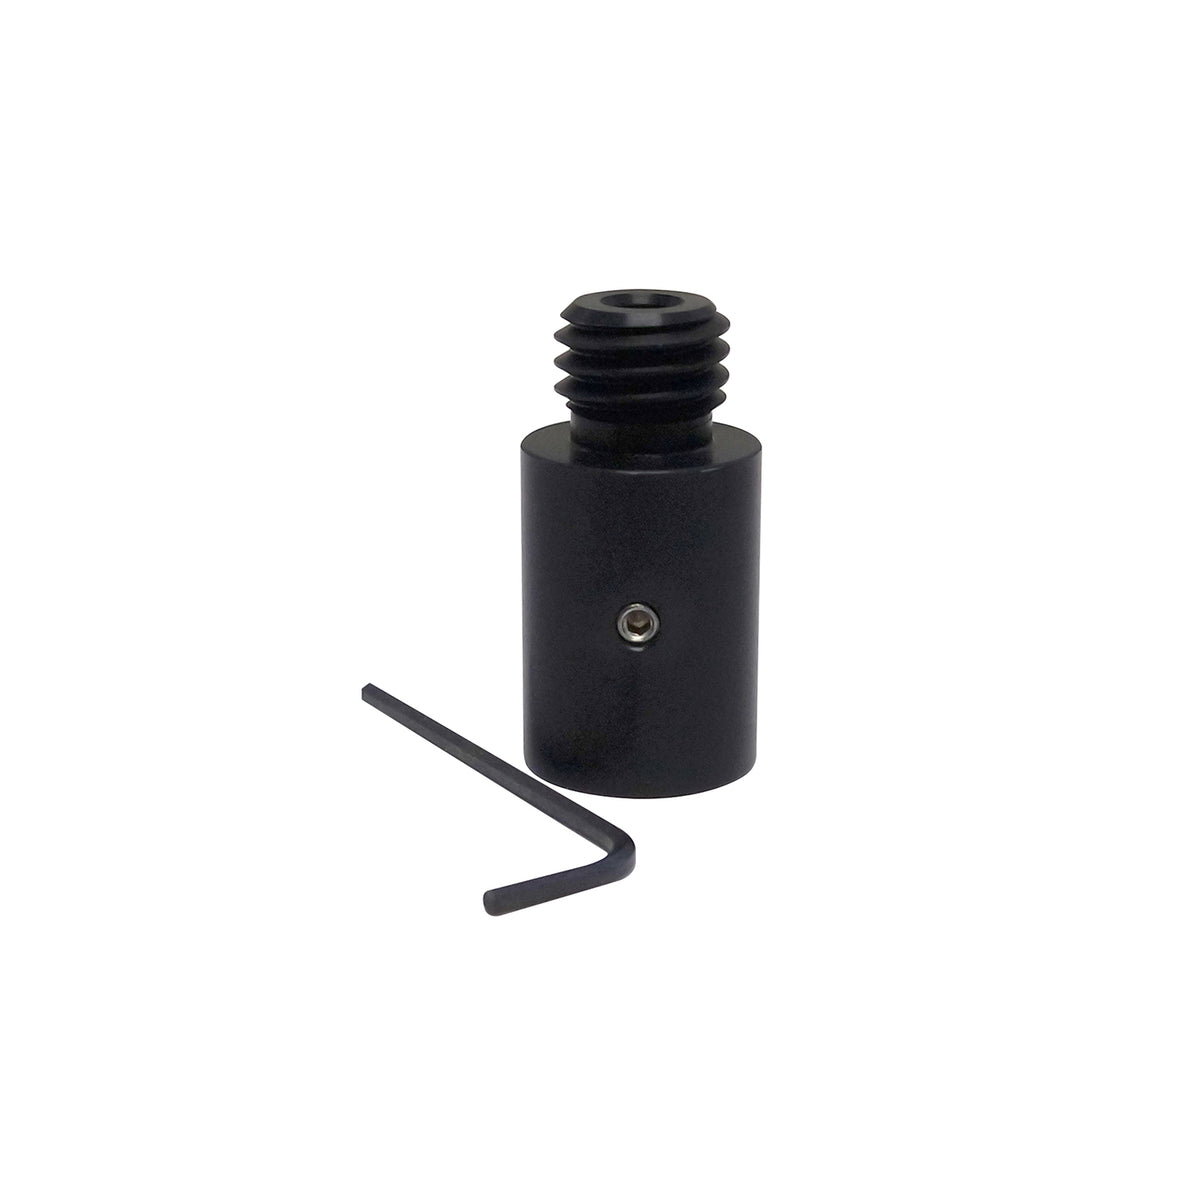 SECO Adapter - For Leica Prism -Adapters- eGPS Solutions Inc.